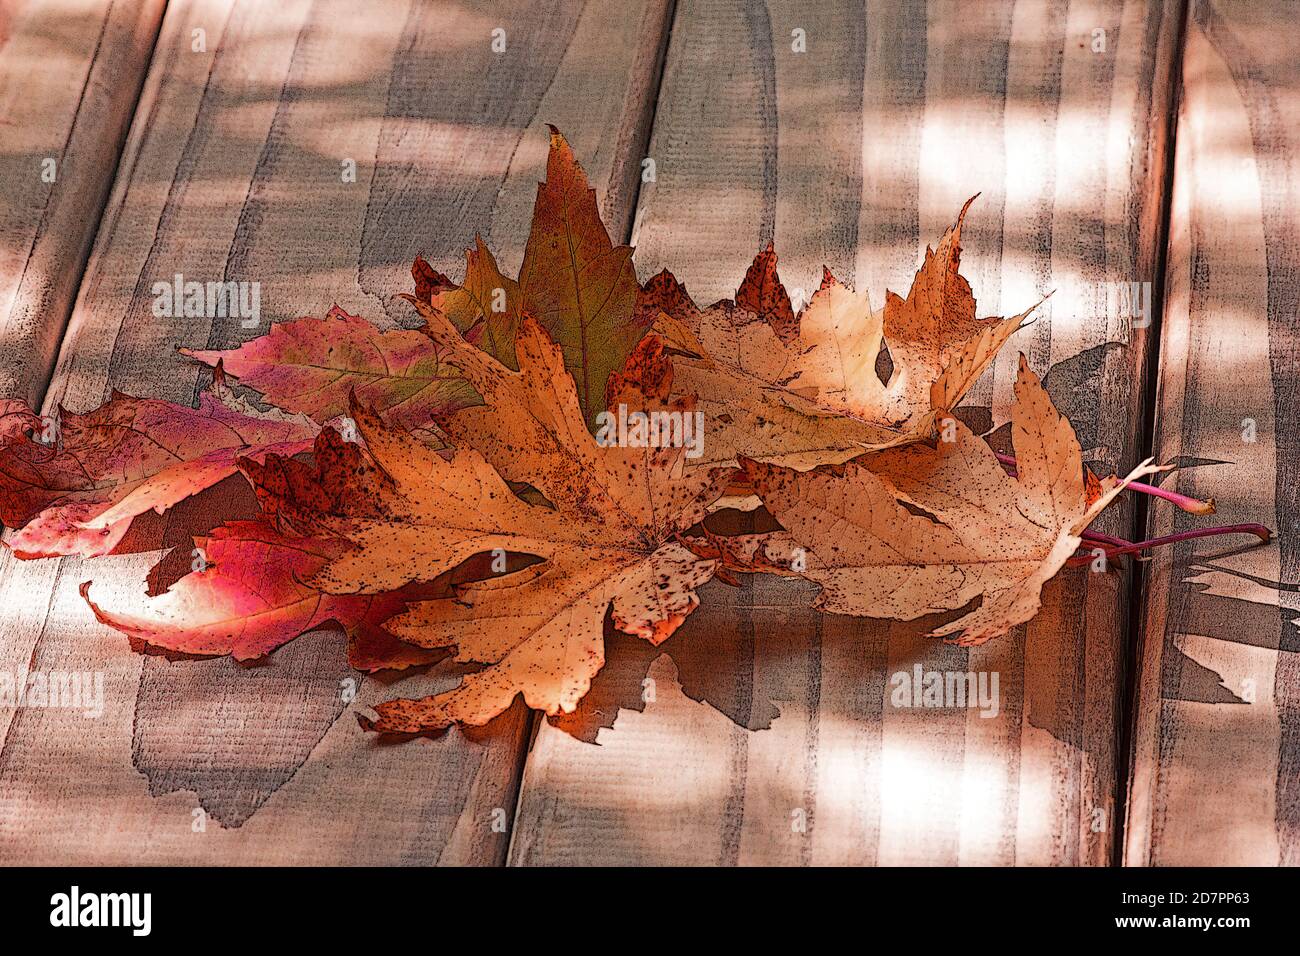 Autumn leaves on wooden table Stock Photo